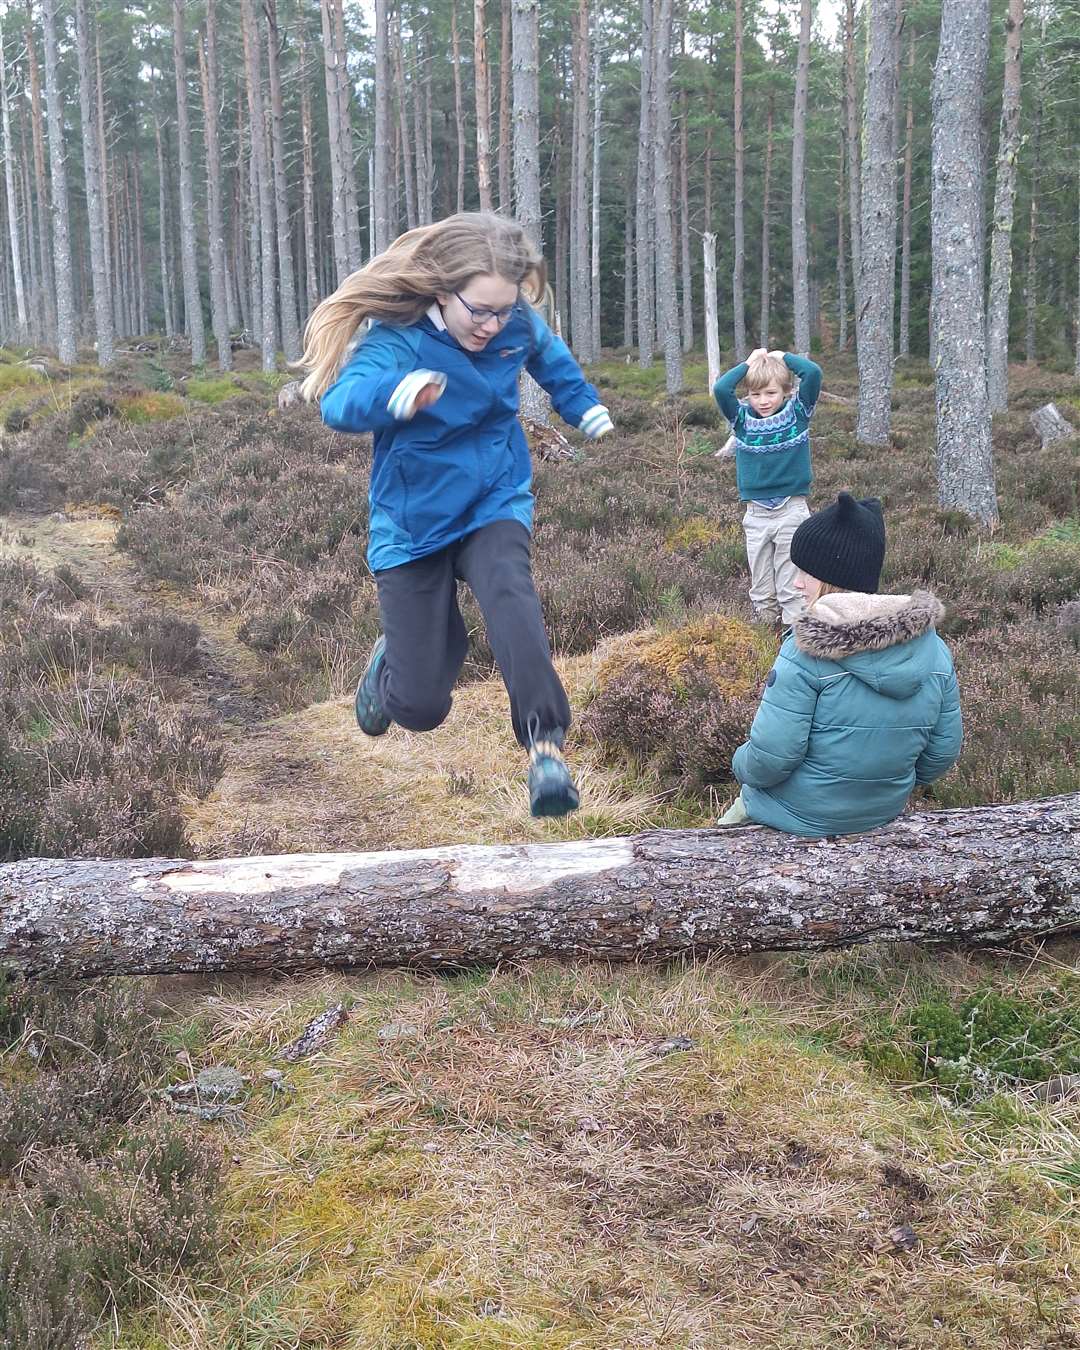 Testing out the natural hurdles in the woods.